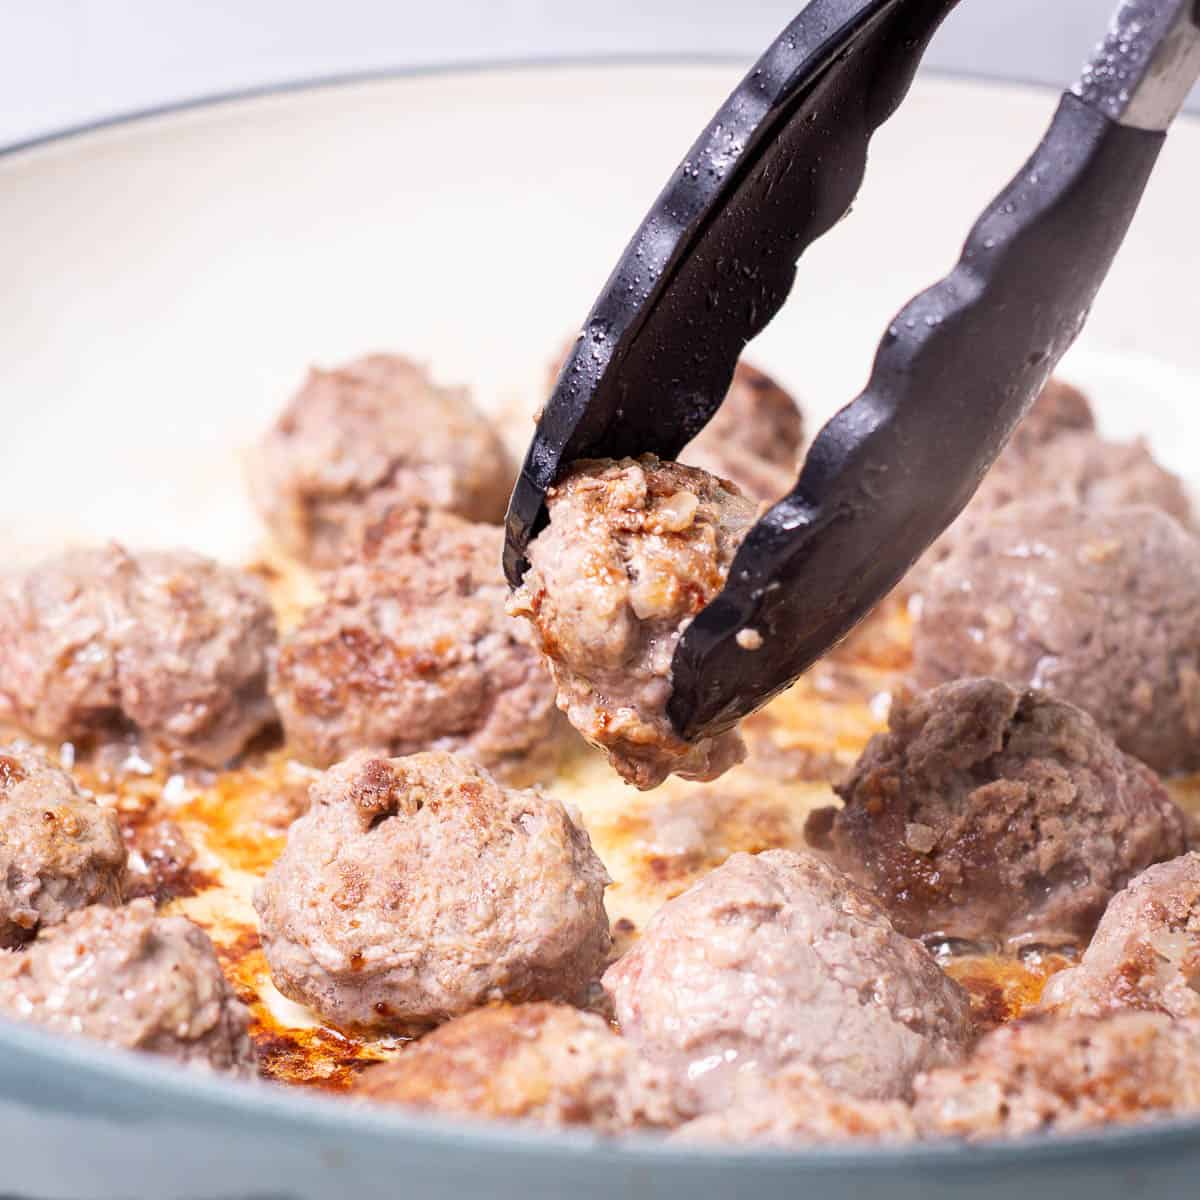 Bison meatballs simmering in a pan with one meatball being raised with kitchen tongs.